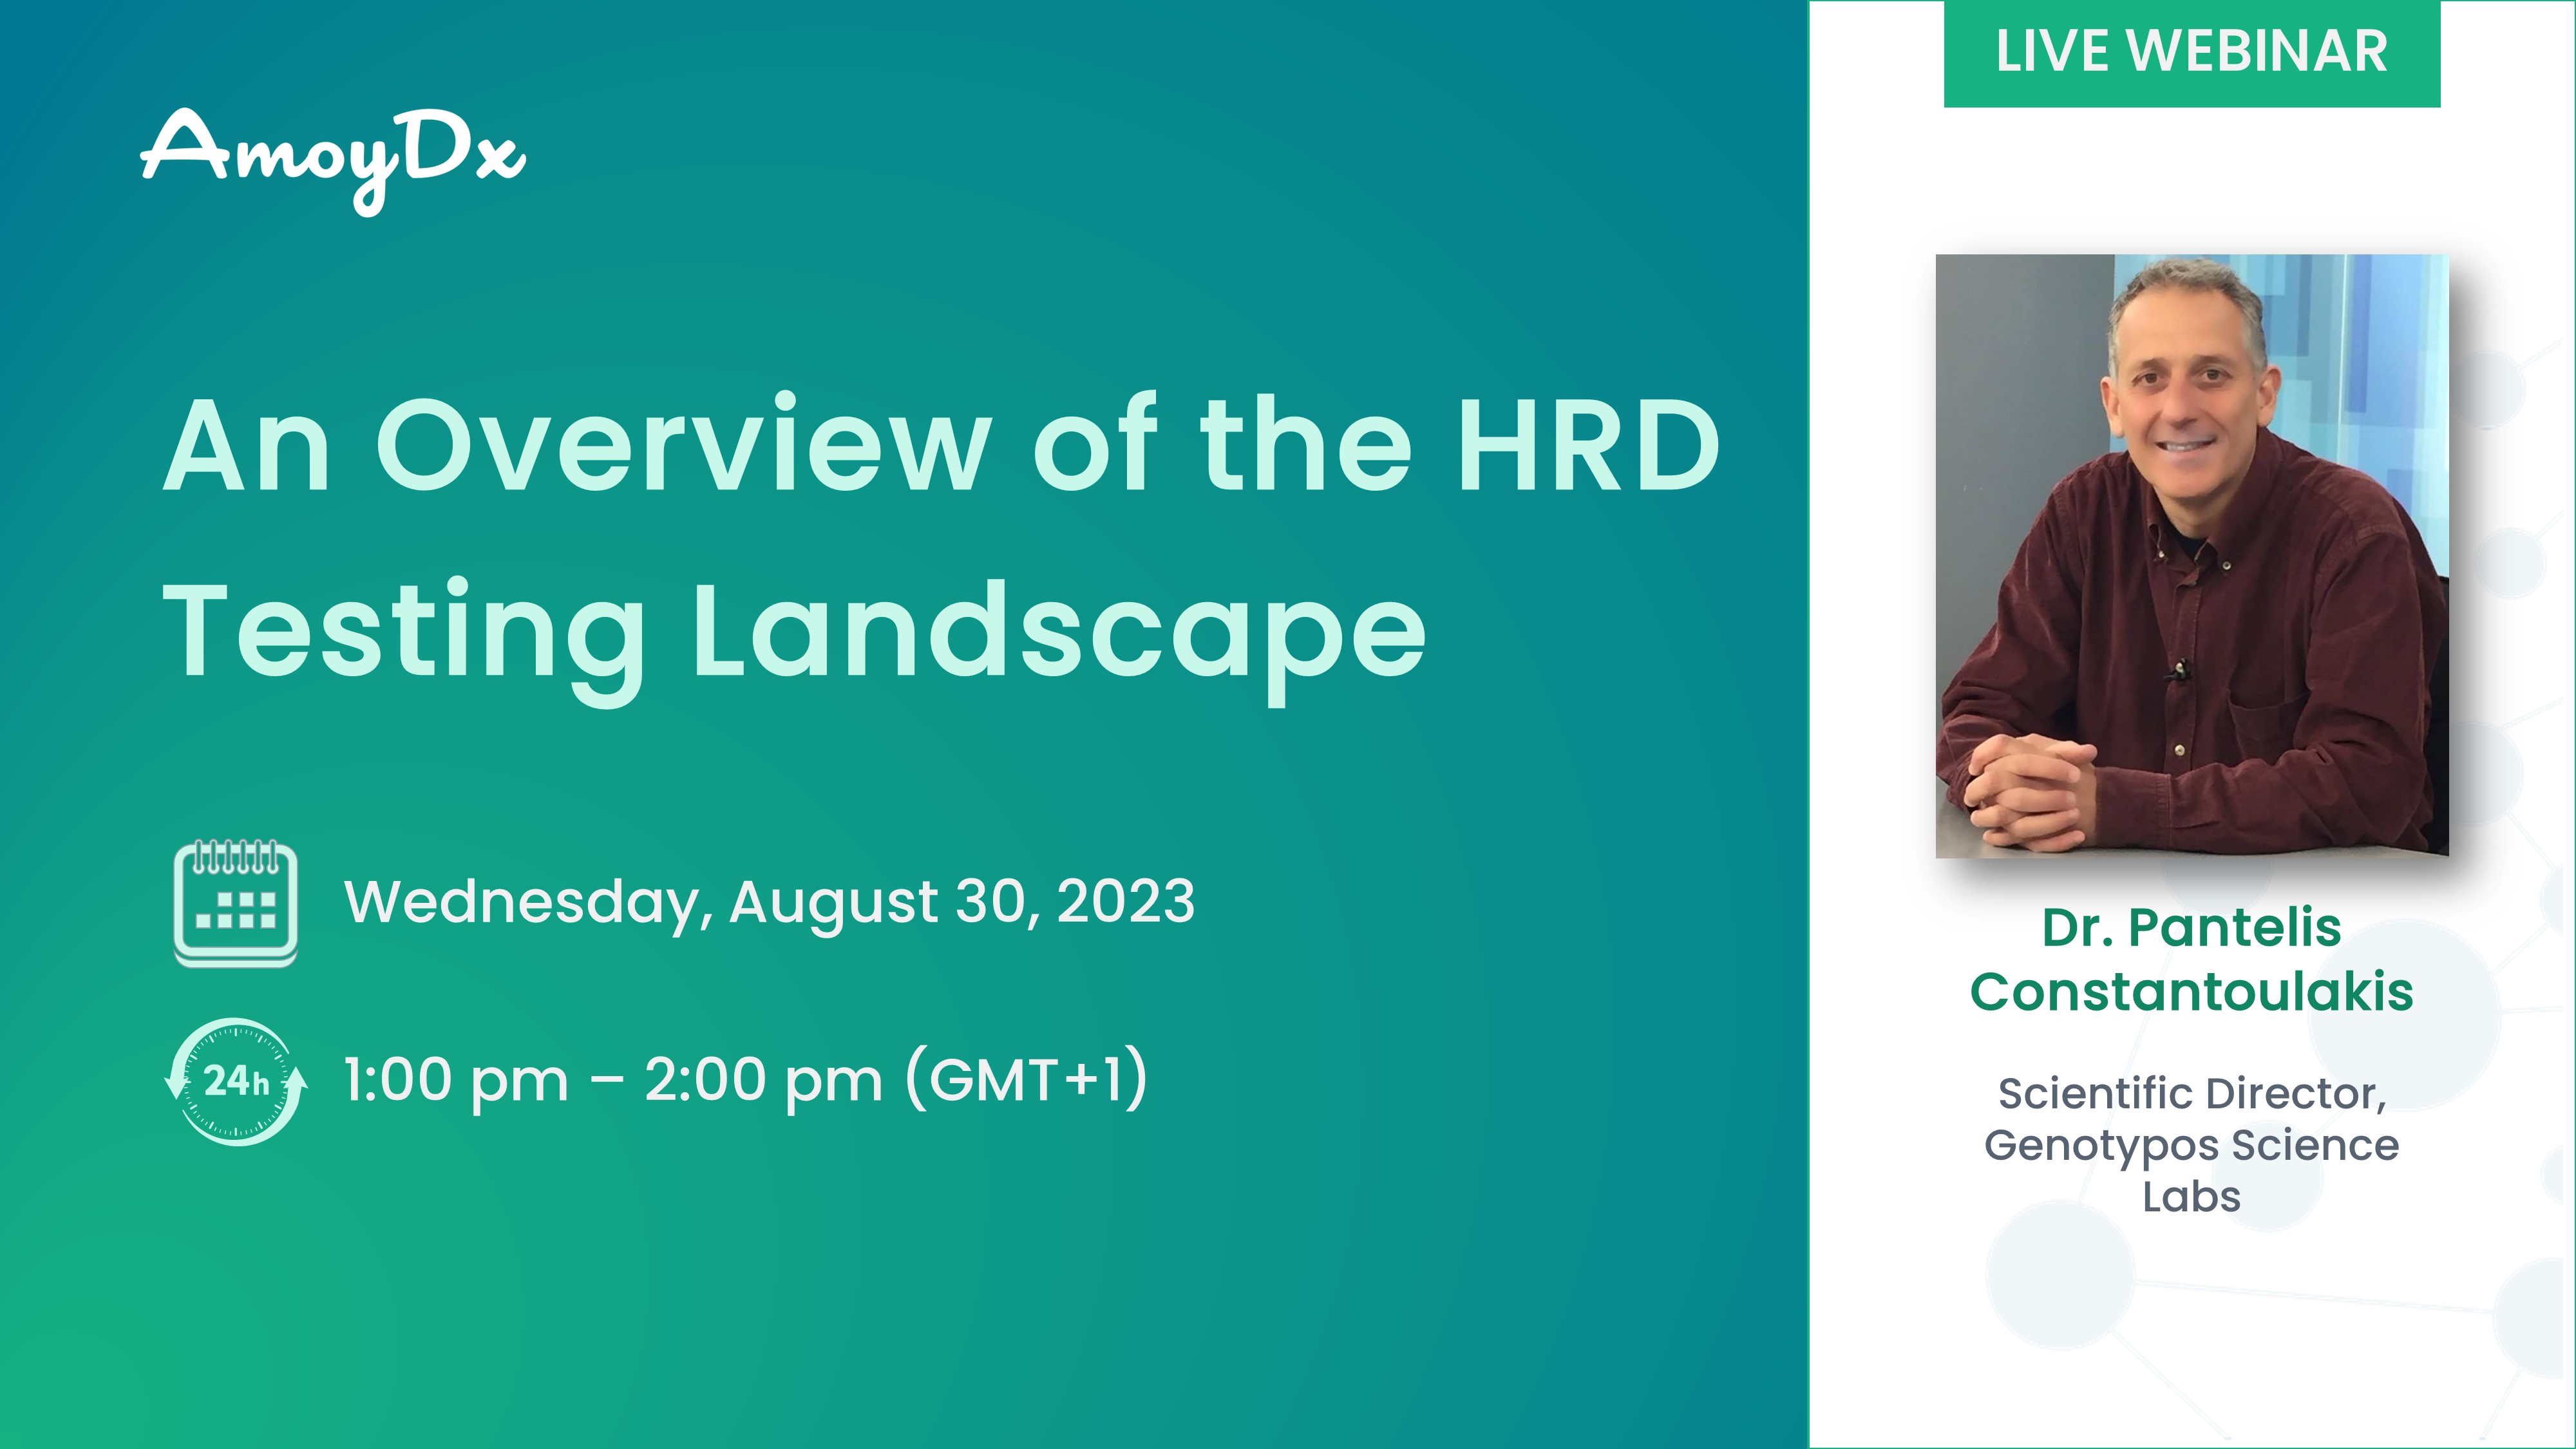 An Overview of the HRD Testing Landscape